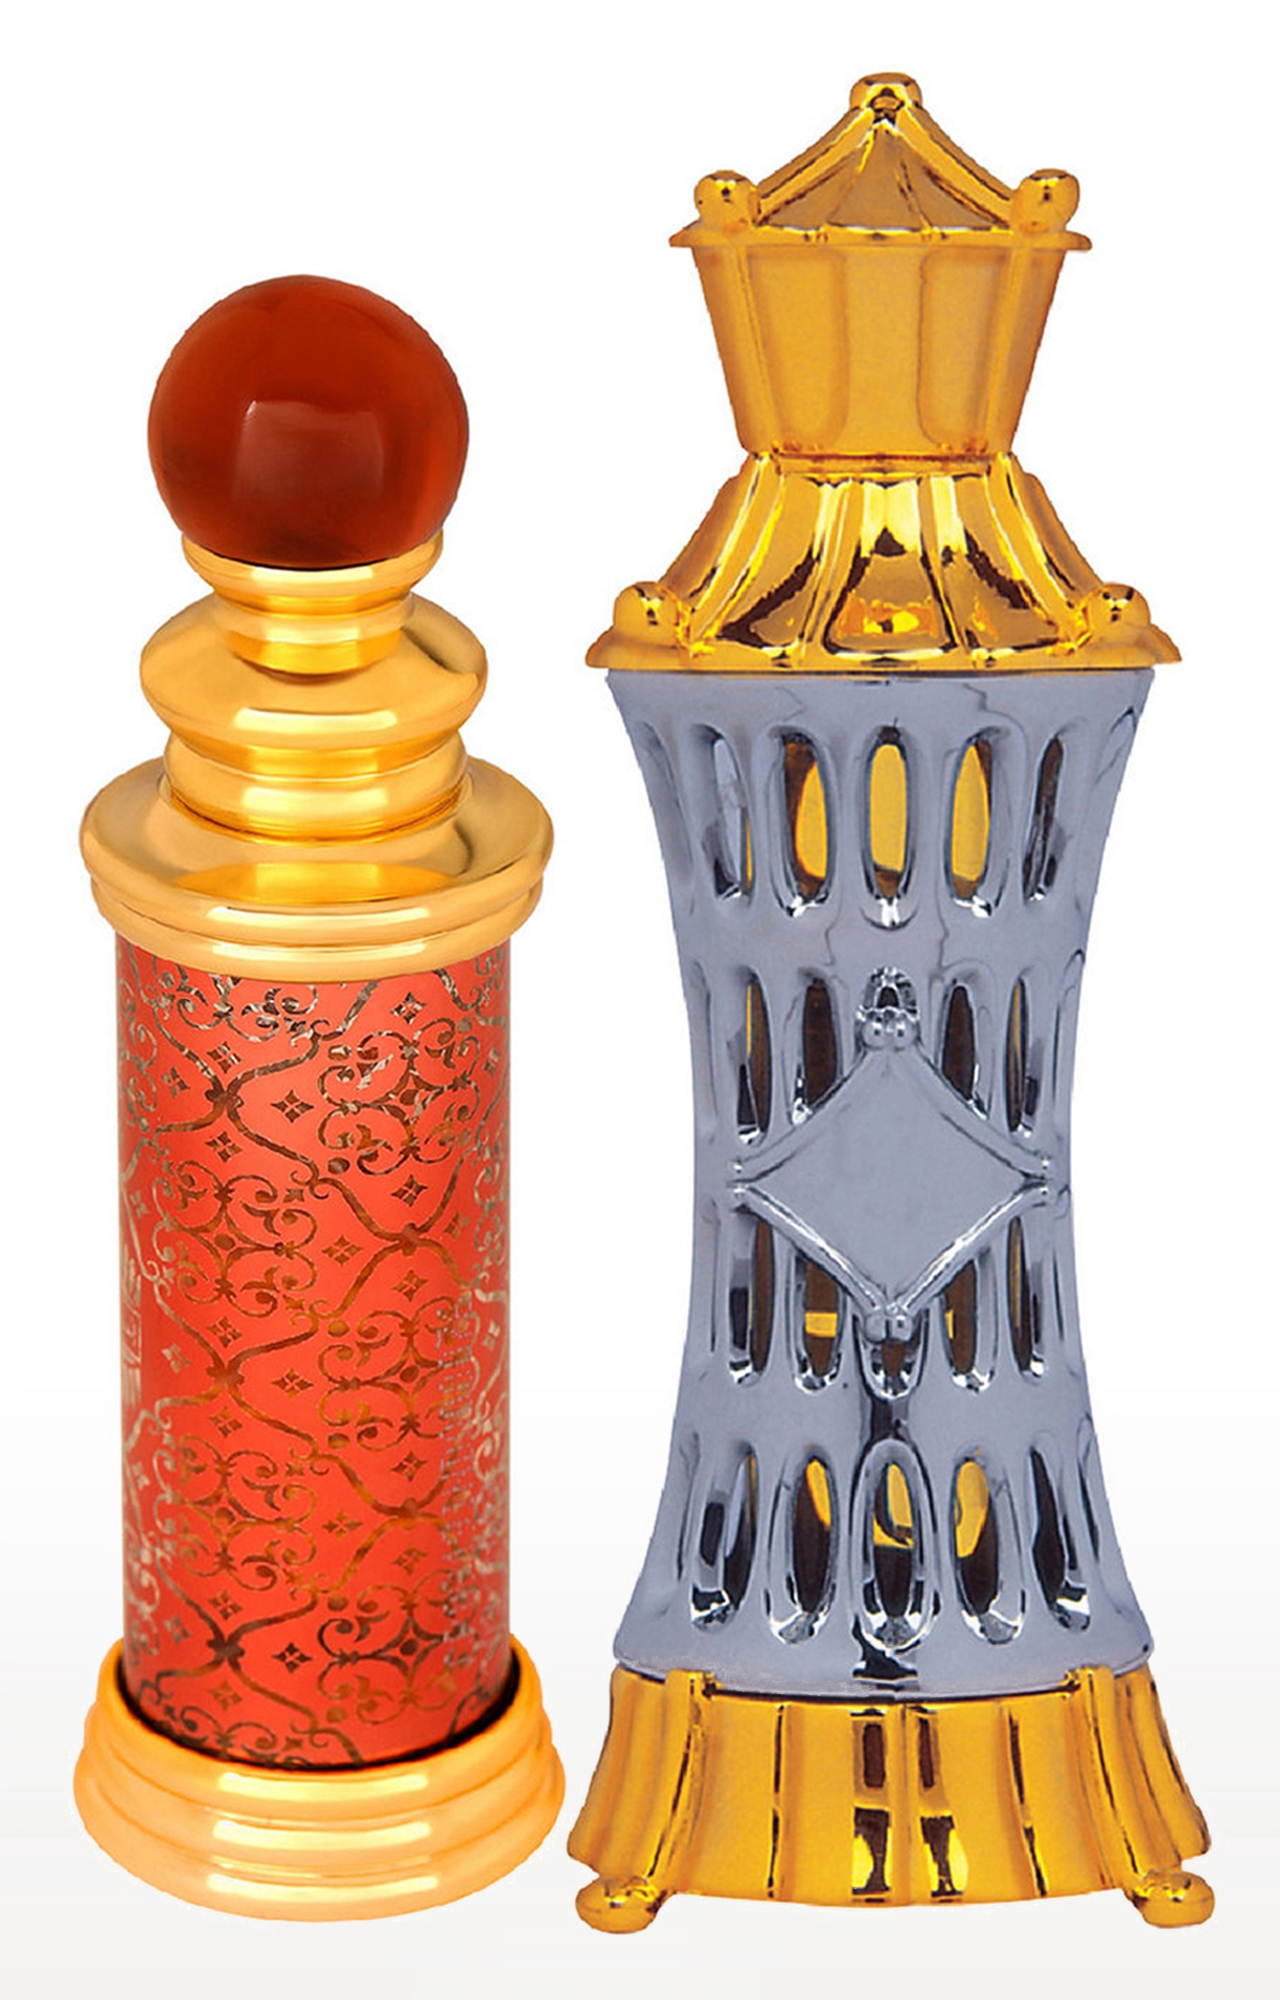 Ajmal Classic Oud Concentrated Perfume Oil Oudh Alcohol-free Attar 10ml for Unisex and Mizyaan Concentrated Perfume Oil Oriental Musky Alcohol-free Attar 14ml for Unisex